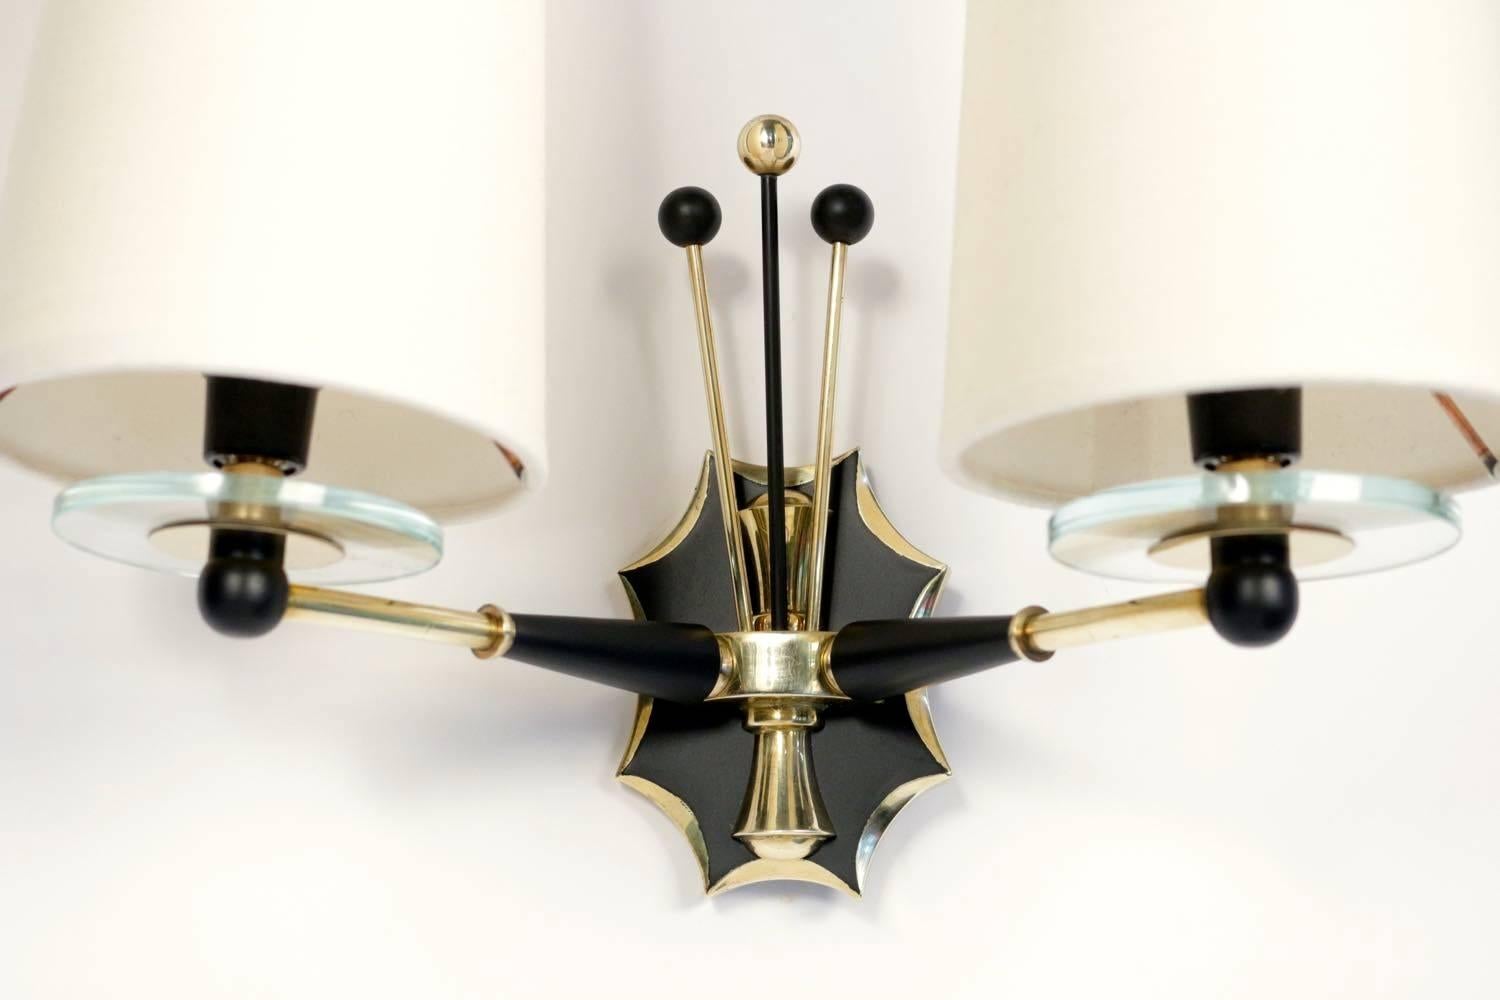 Mid-20th Century Pair of 1950s Sconces by Maison Lunel